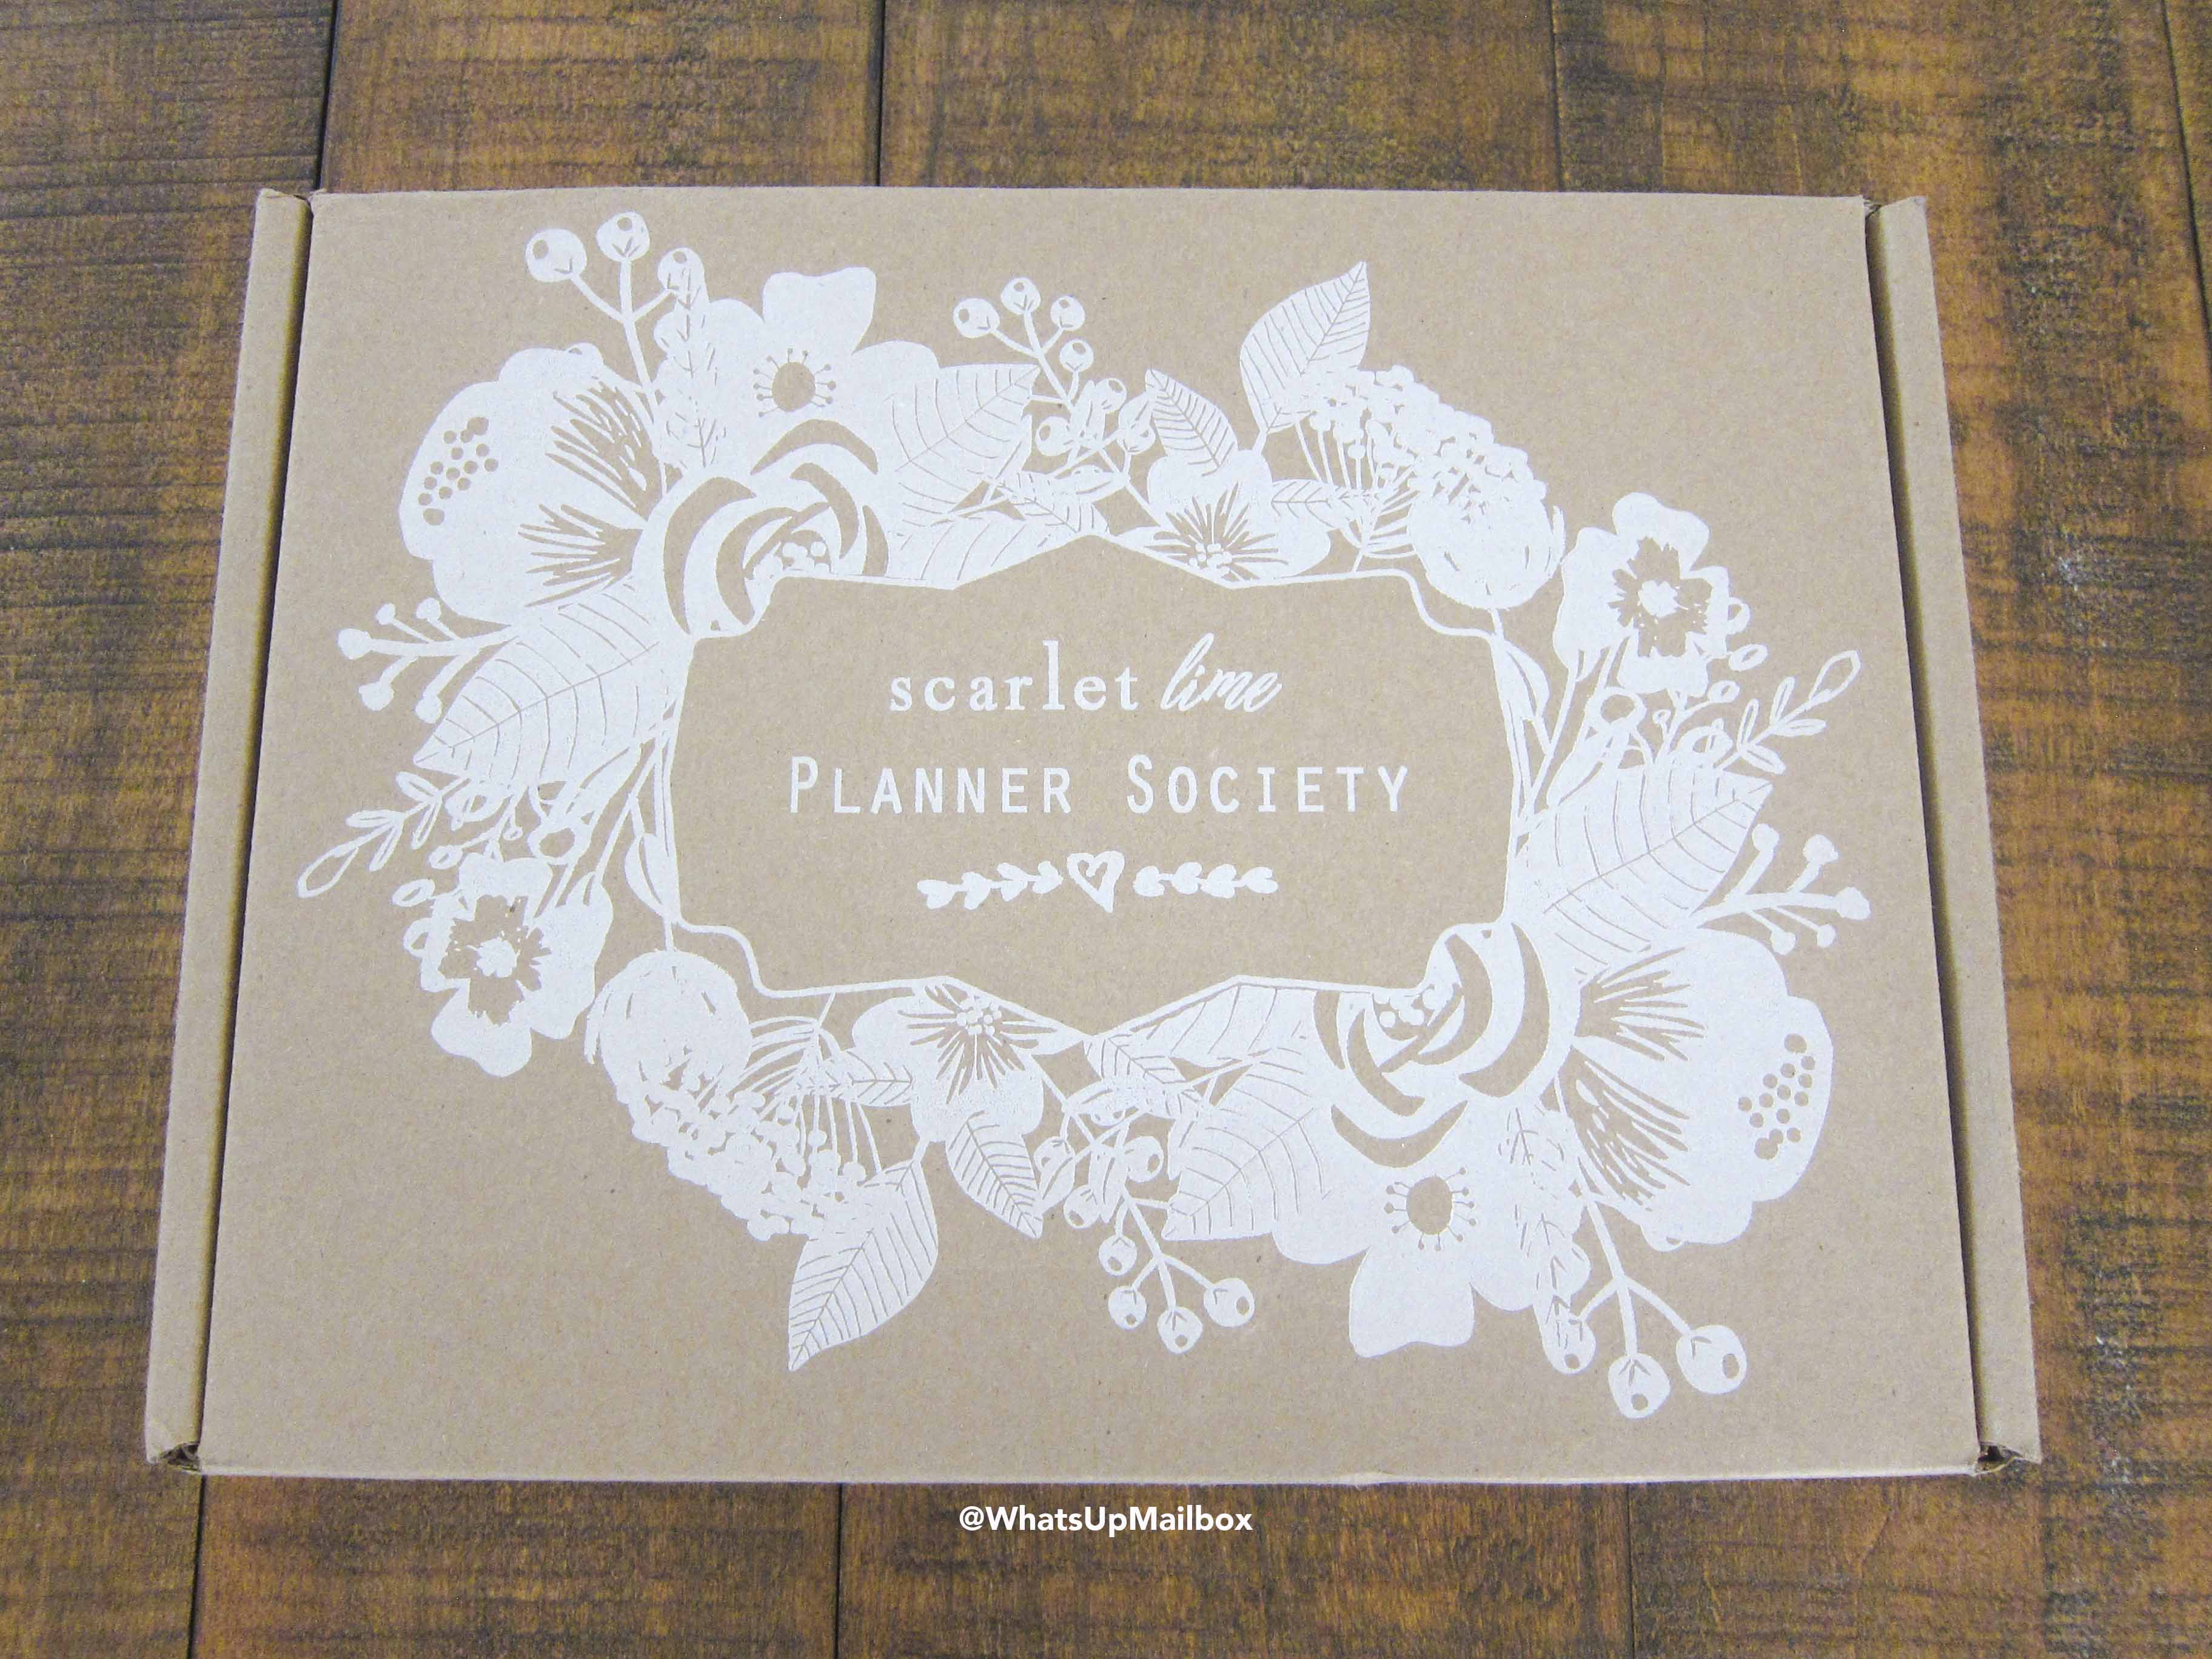 The Planner Society